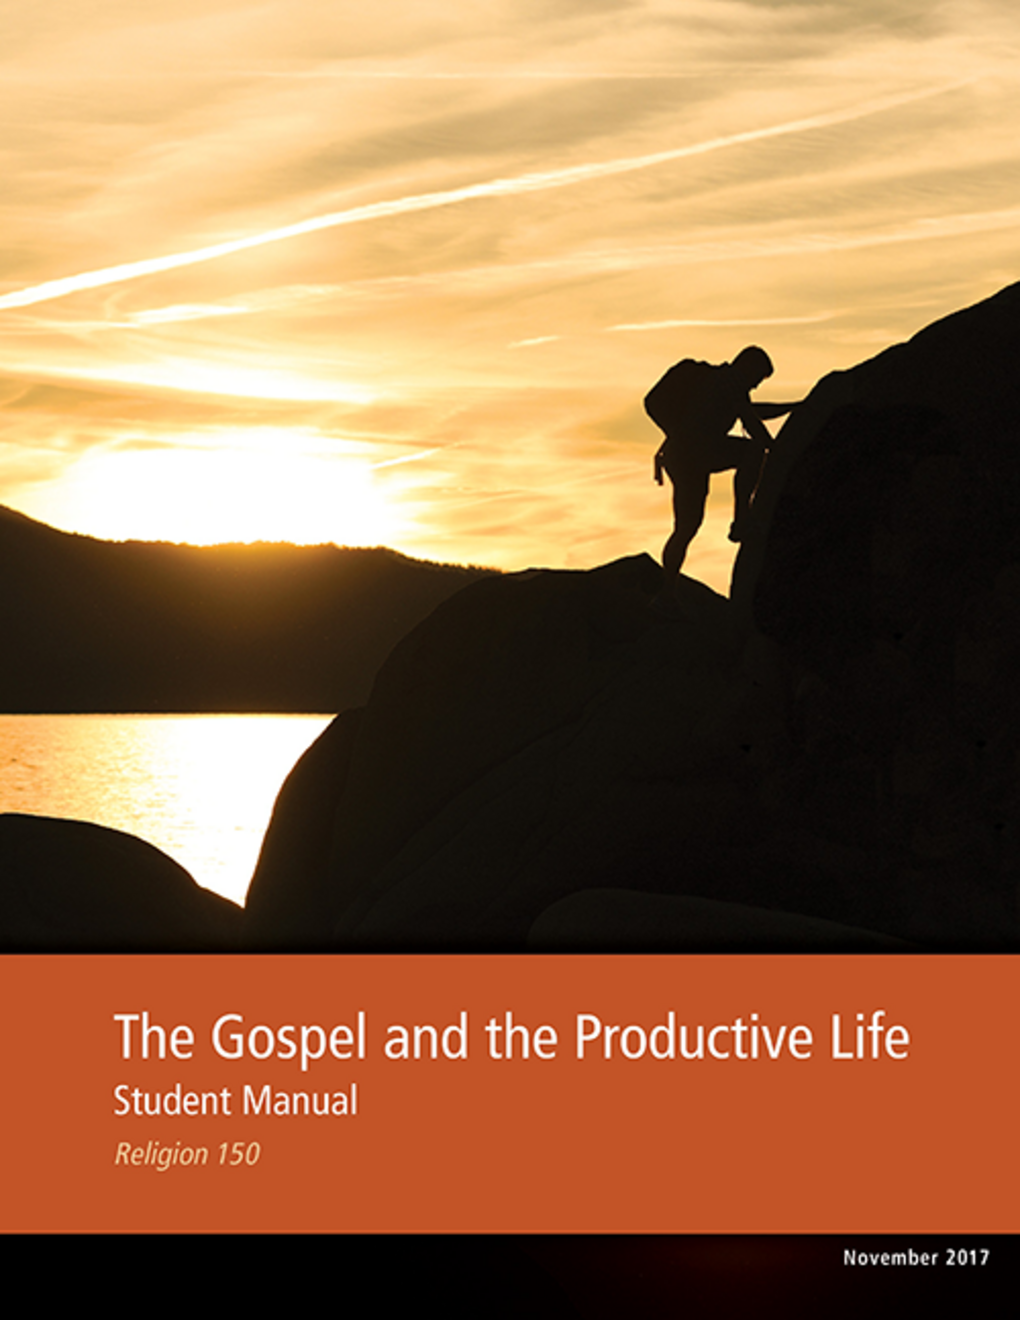 The Gospel and the Productive Life Student Manual (Rel 150)